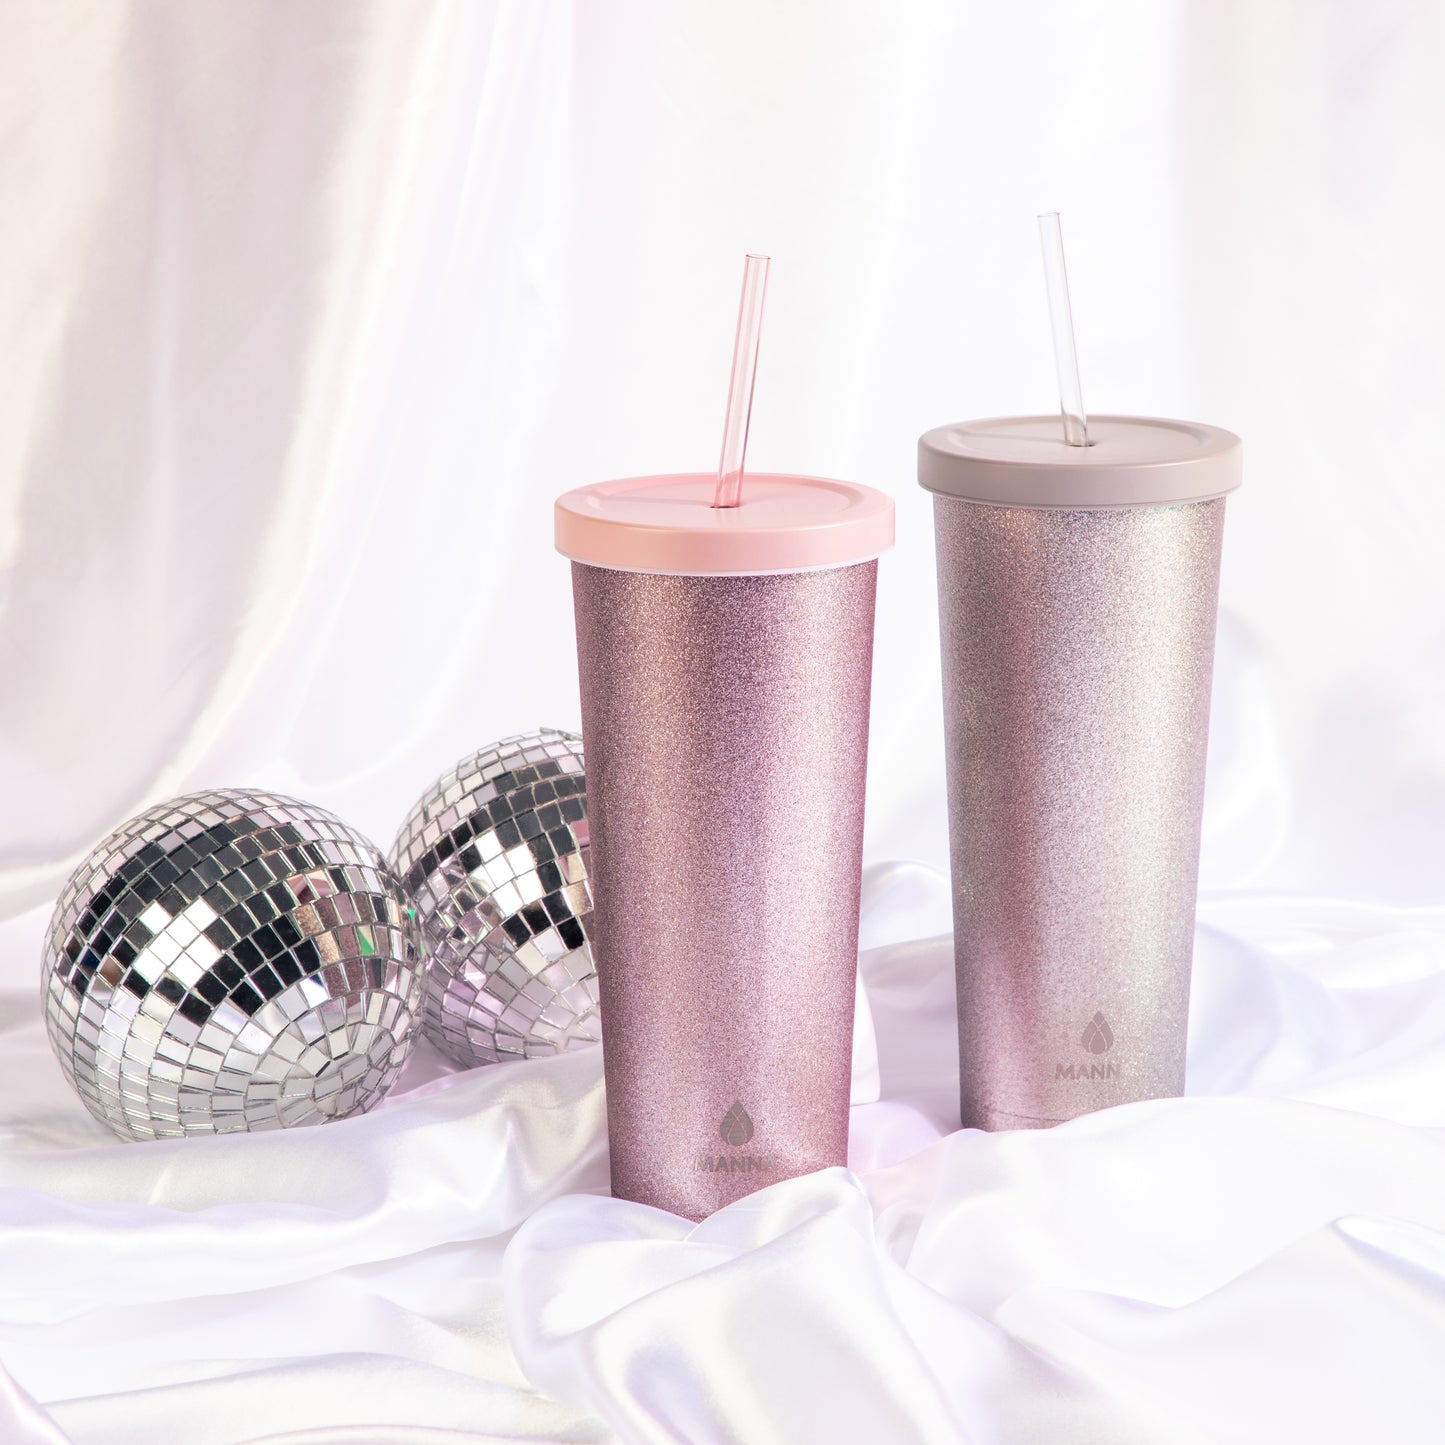 Double Walled Glitter 24oz Plastic Tumbler Reusable Iced Coffee